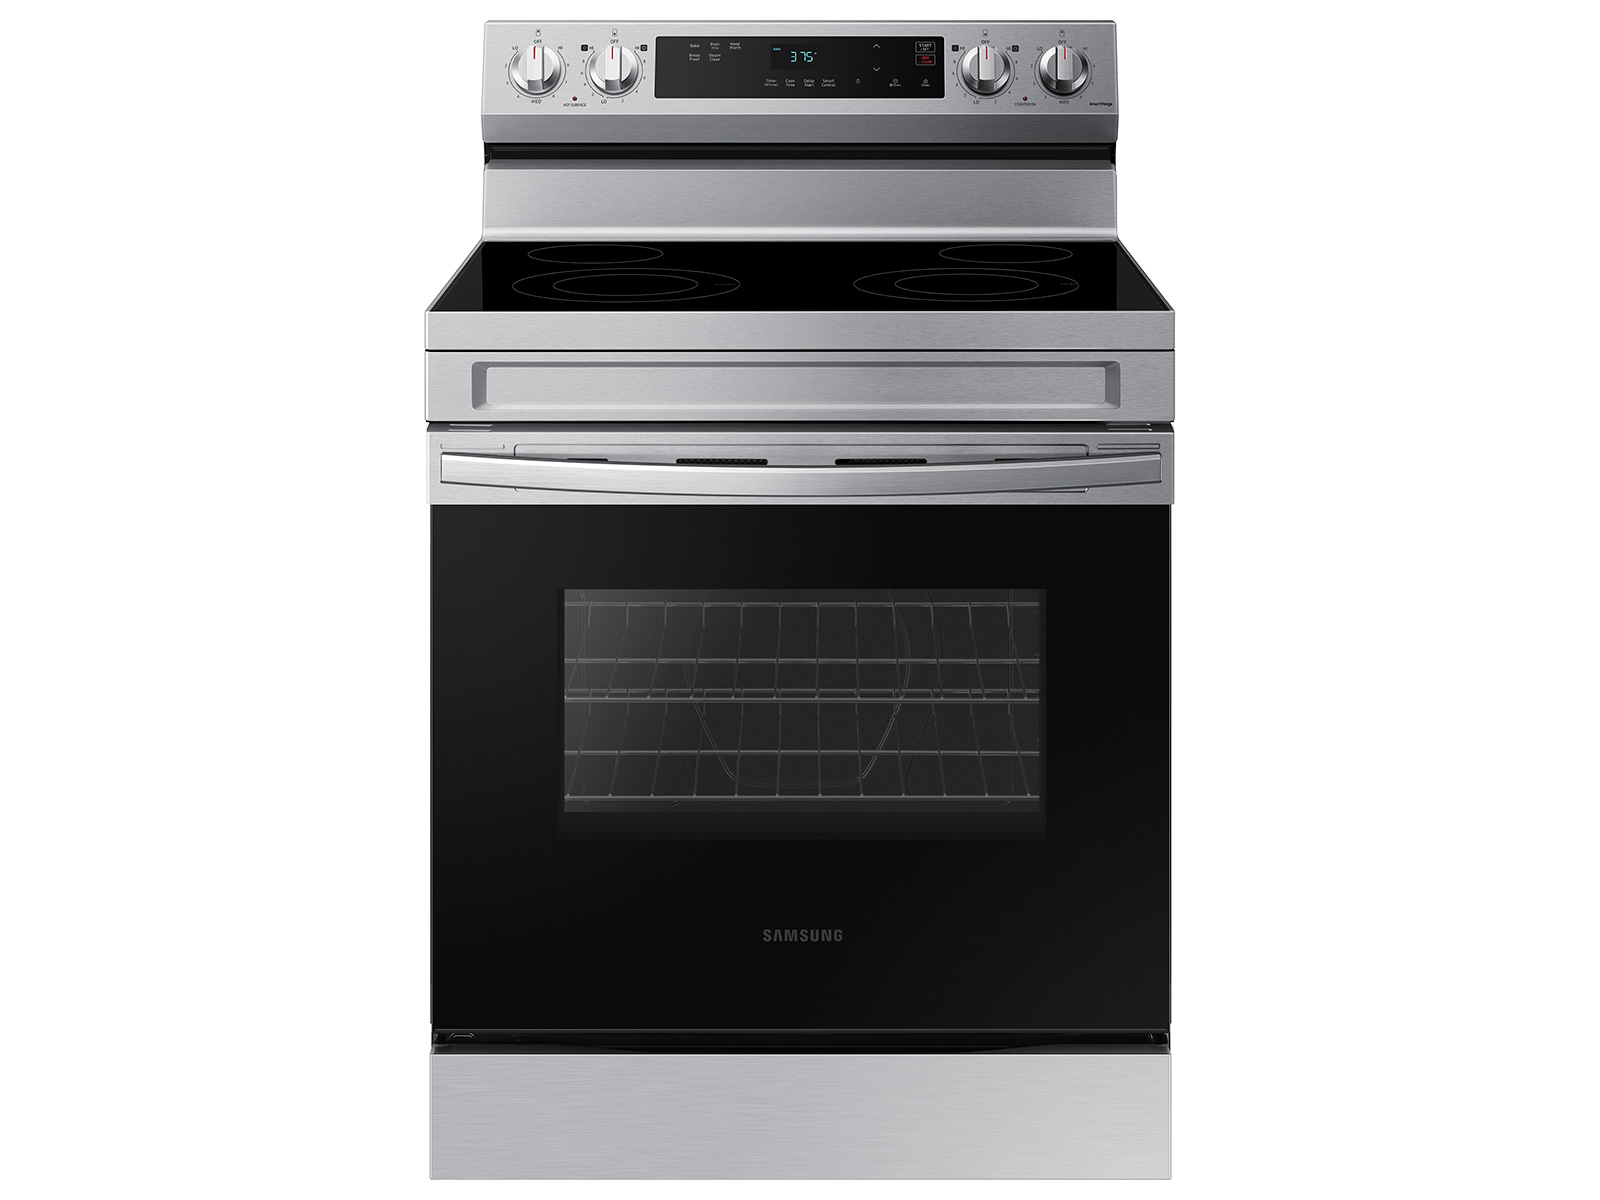 Samsung 6.3 cu. ft. Smart Freestanding Electric Range with Steam Clean in Stainless Steel(NE63A6111SS/AA)